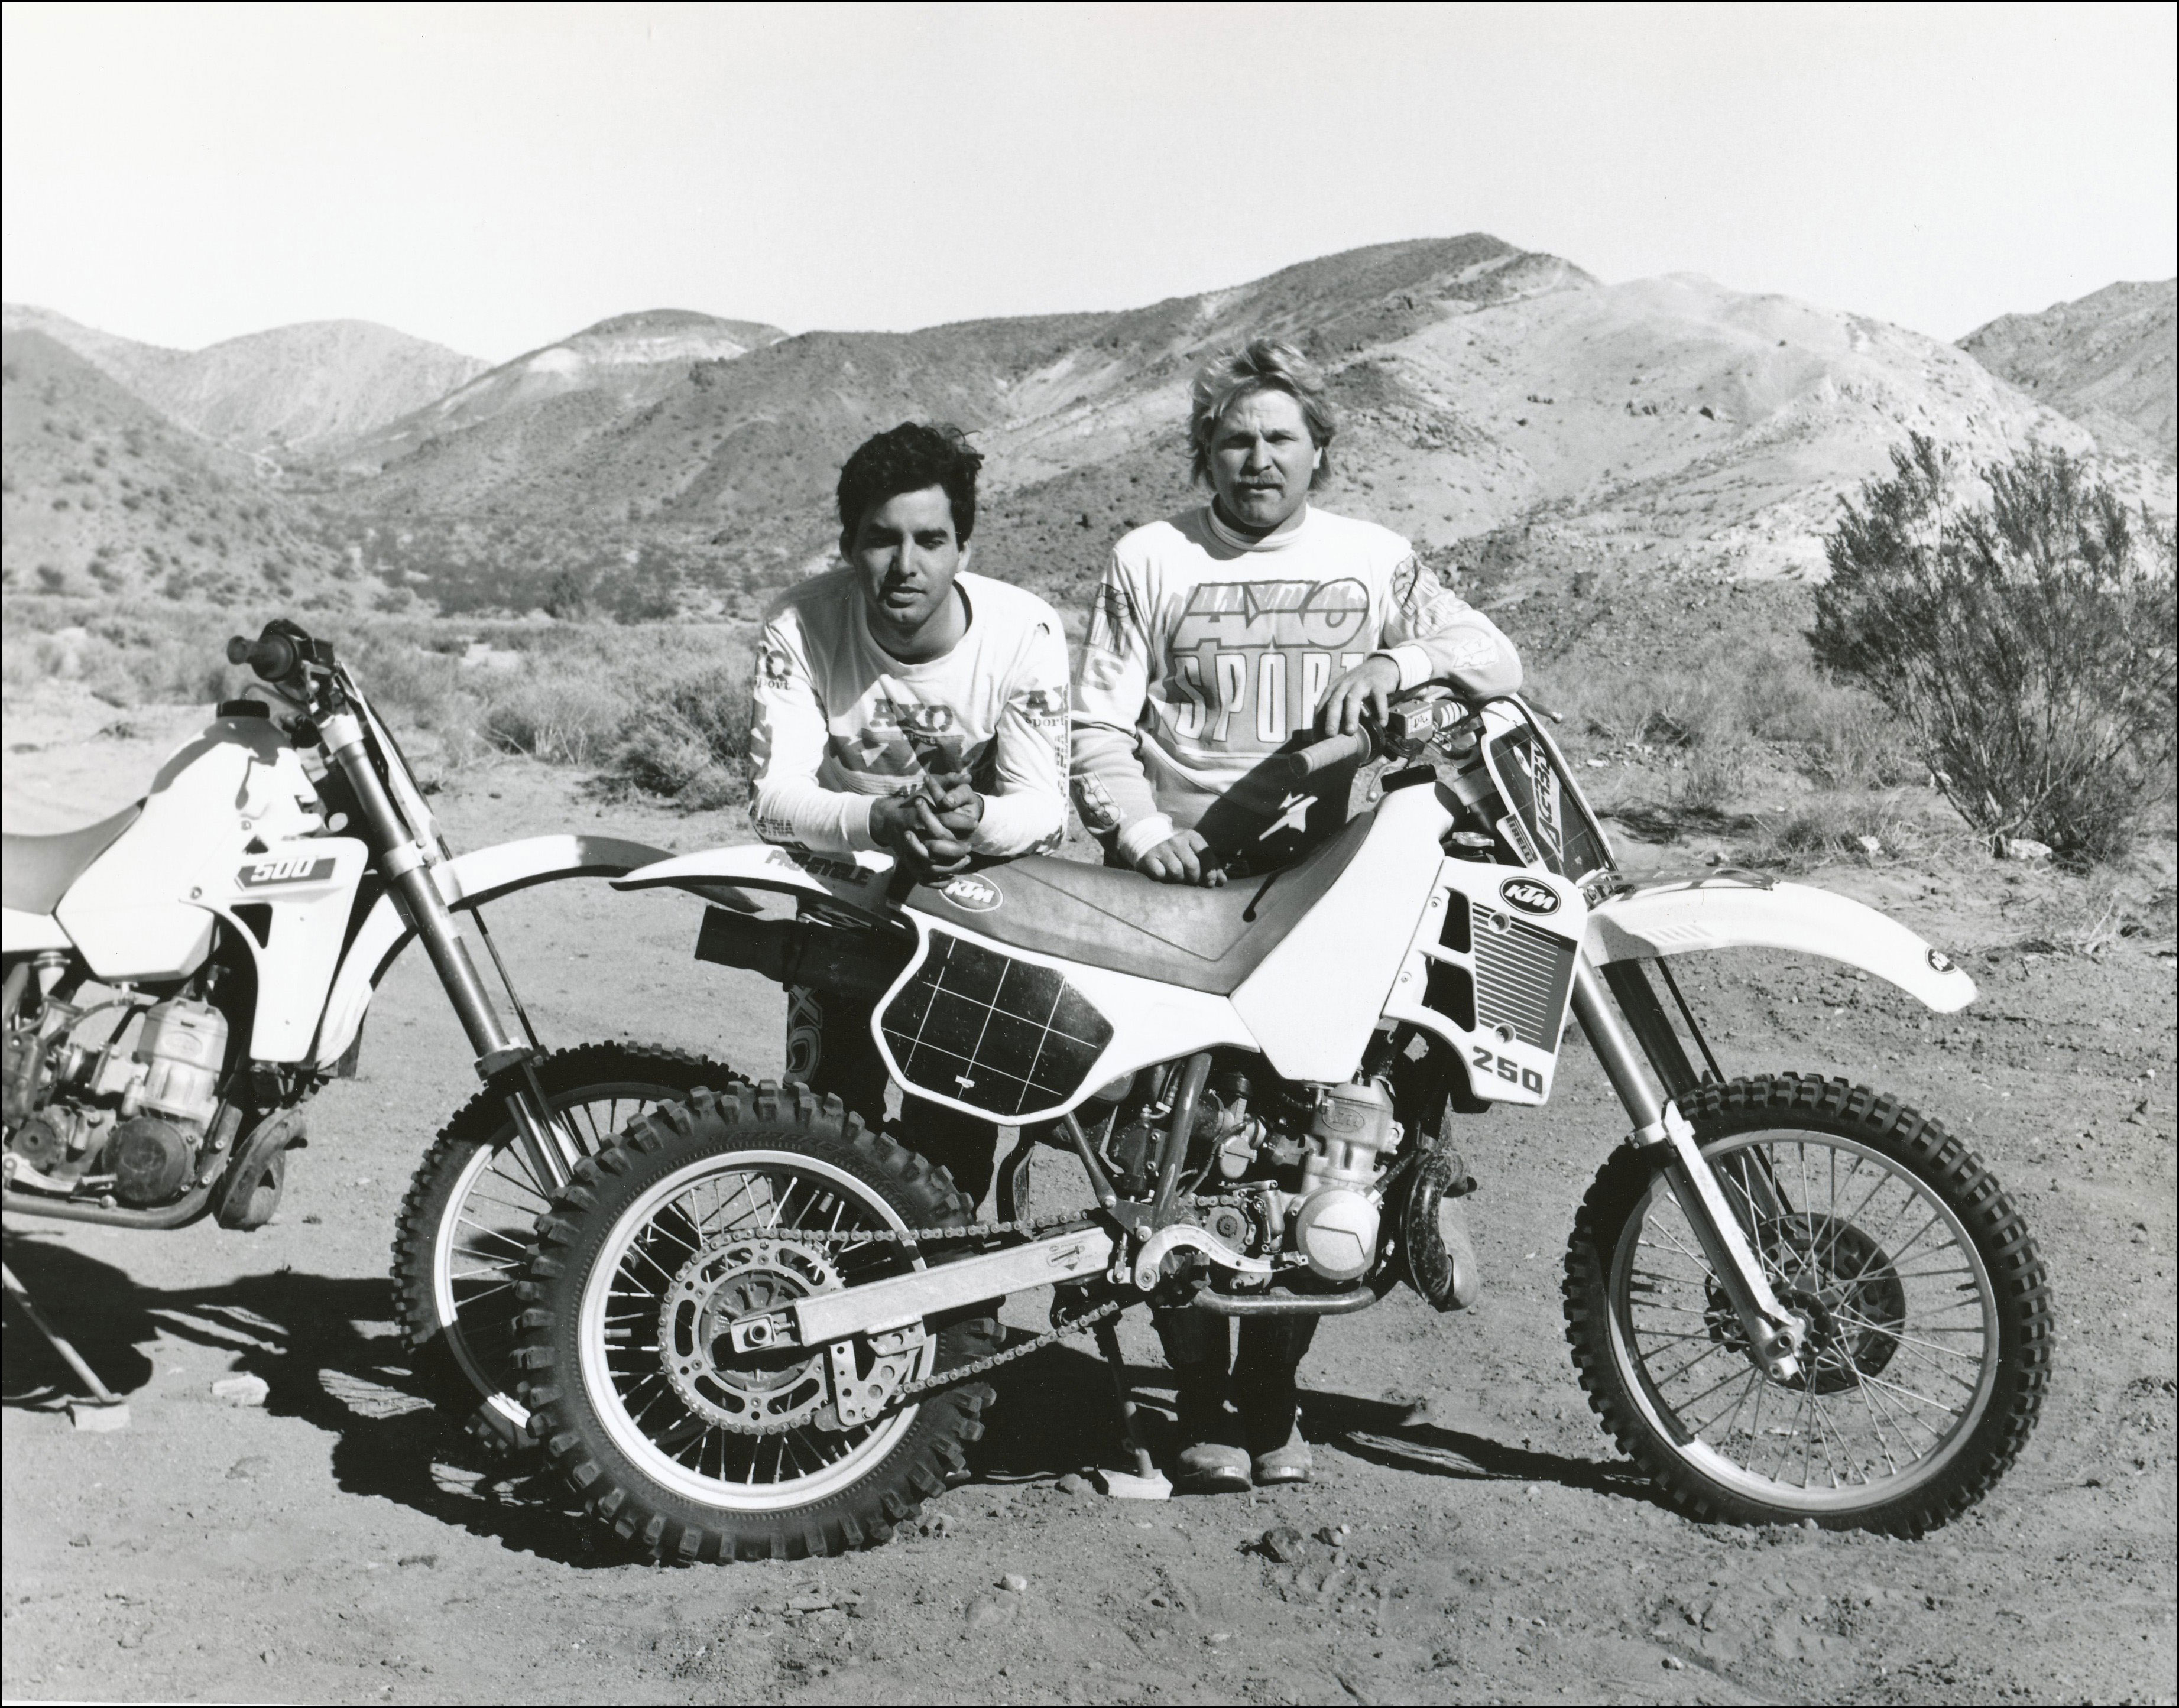 Dirt bikers posing with their bikes. Dry hills with sagebrush behind in the background